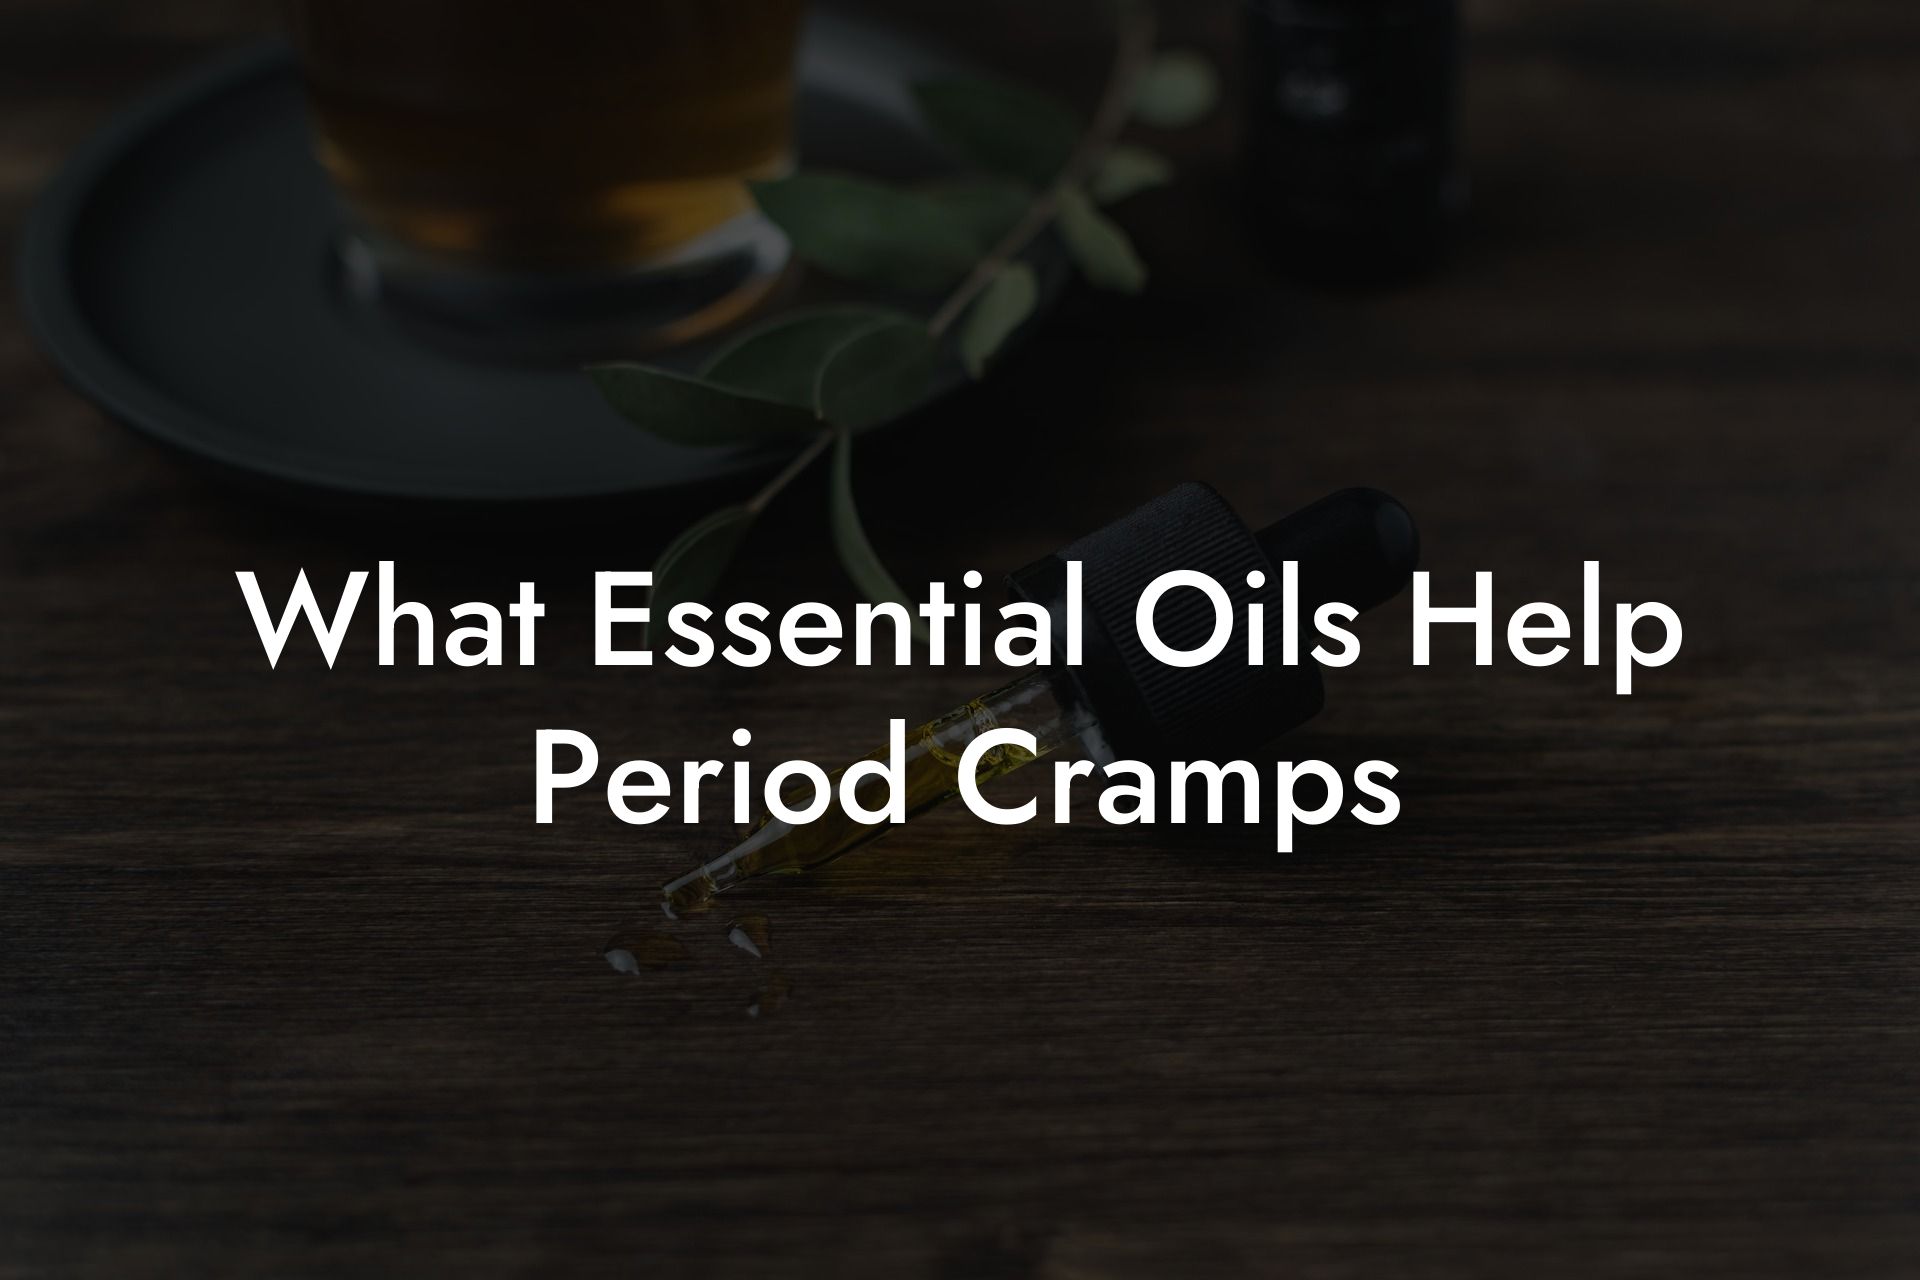 What Essential Oils Help Period Cramps